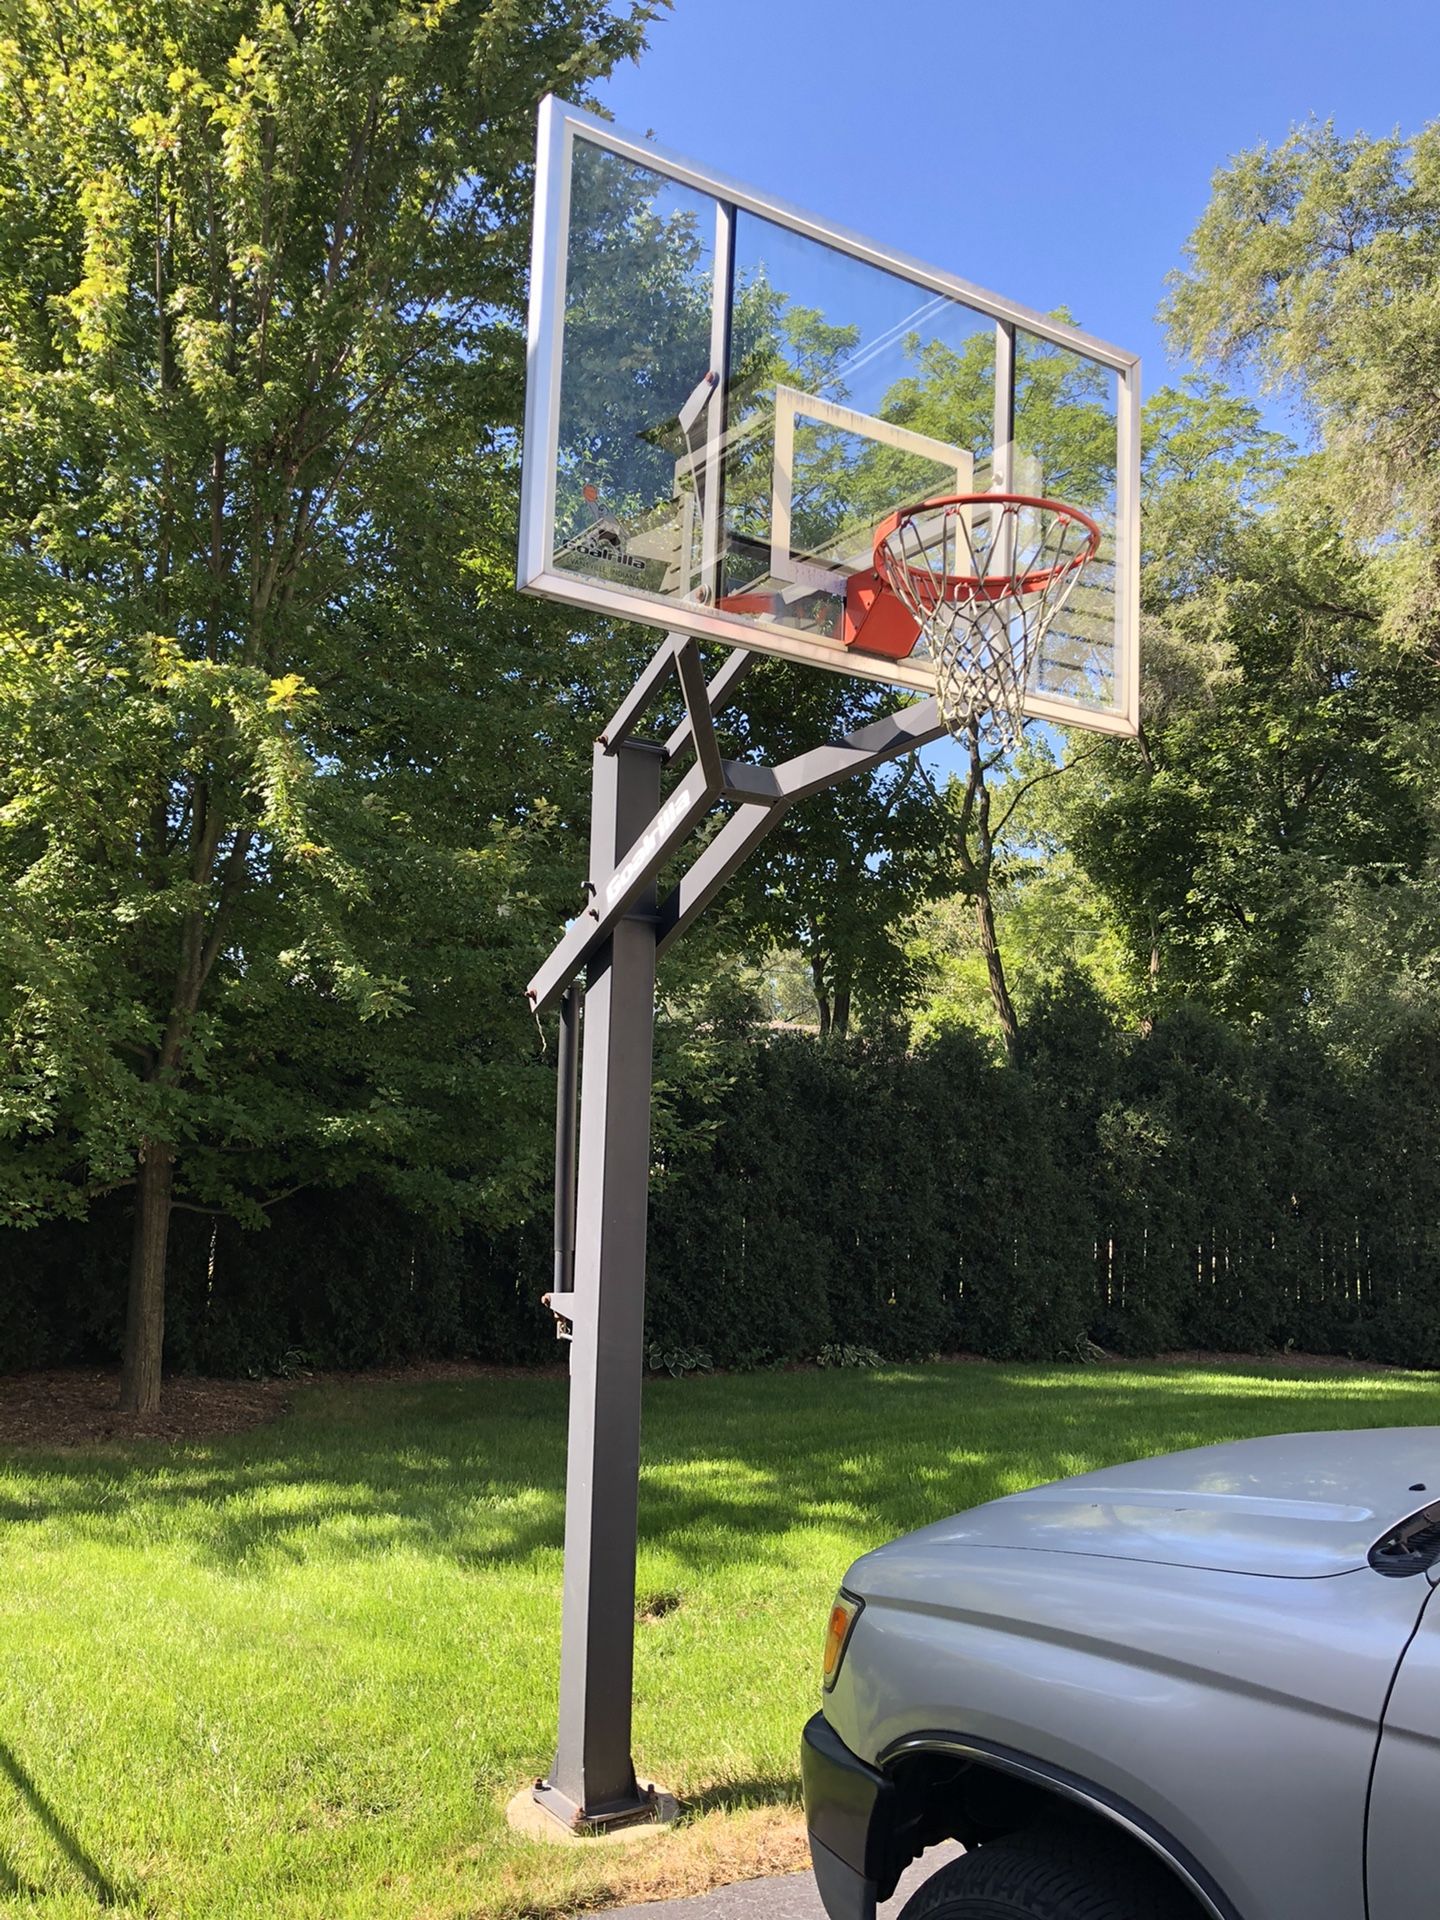 Goalrilla basketball goal. Priced to sell now. Top of the line 72” model b3100.